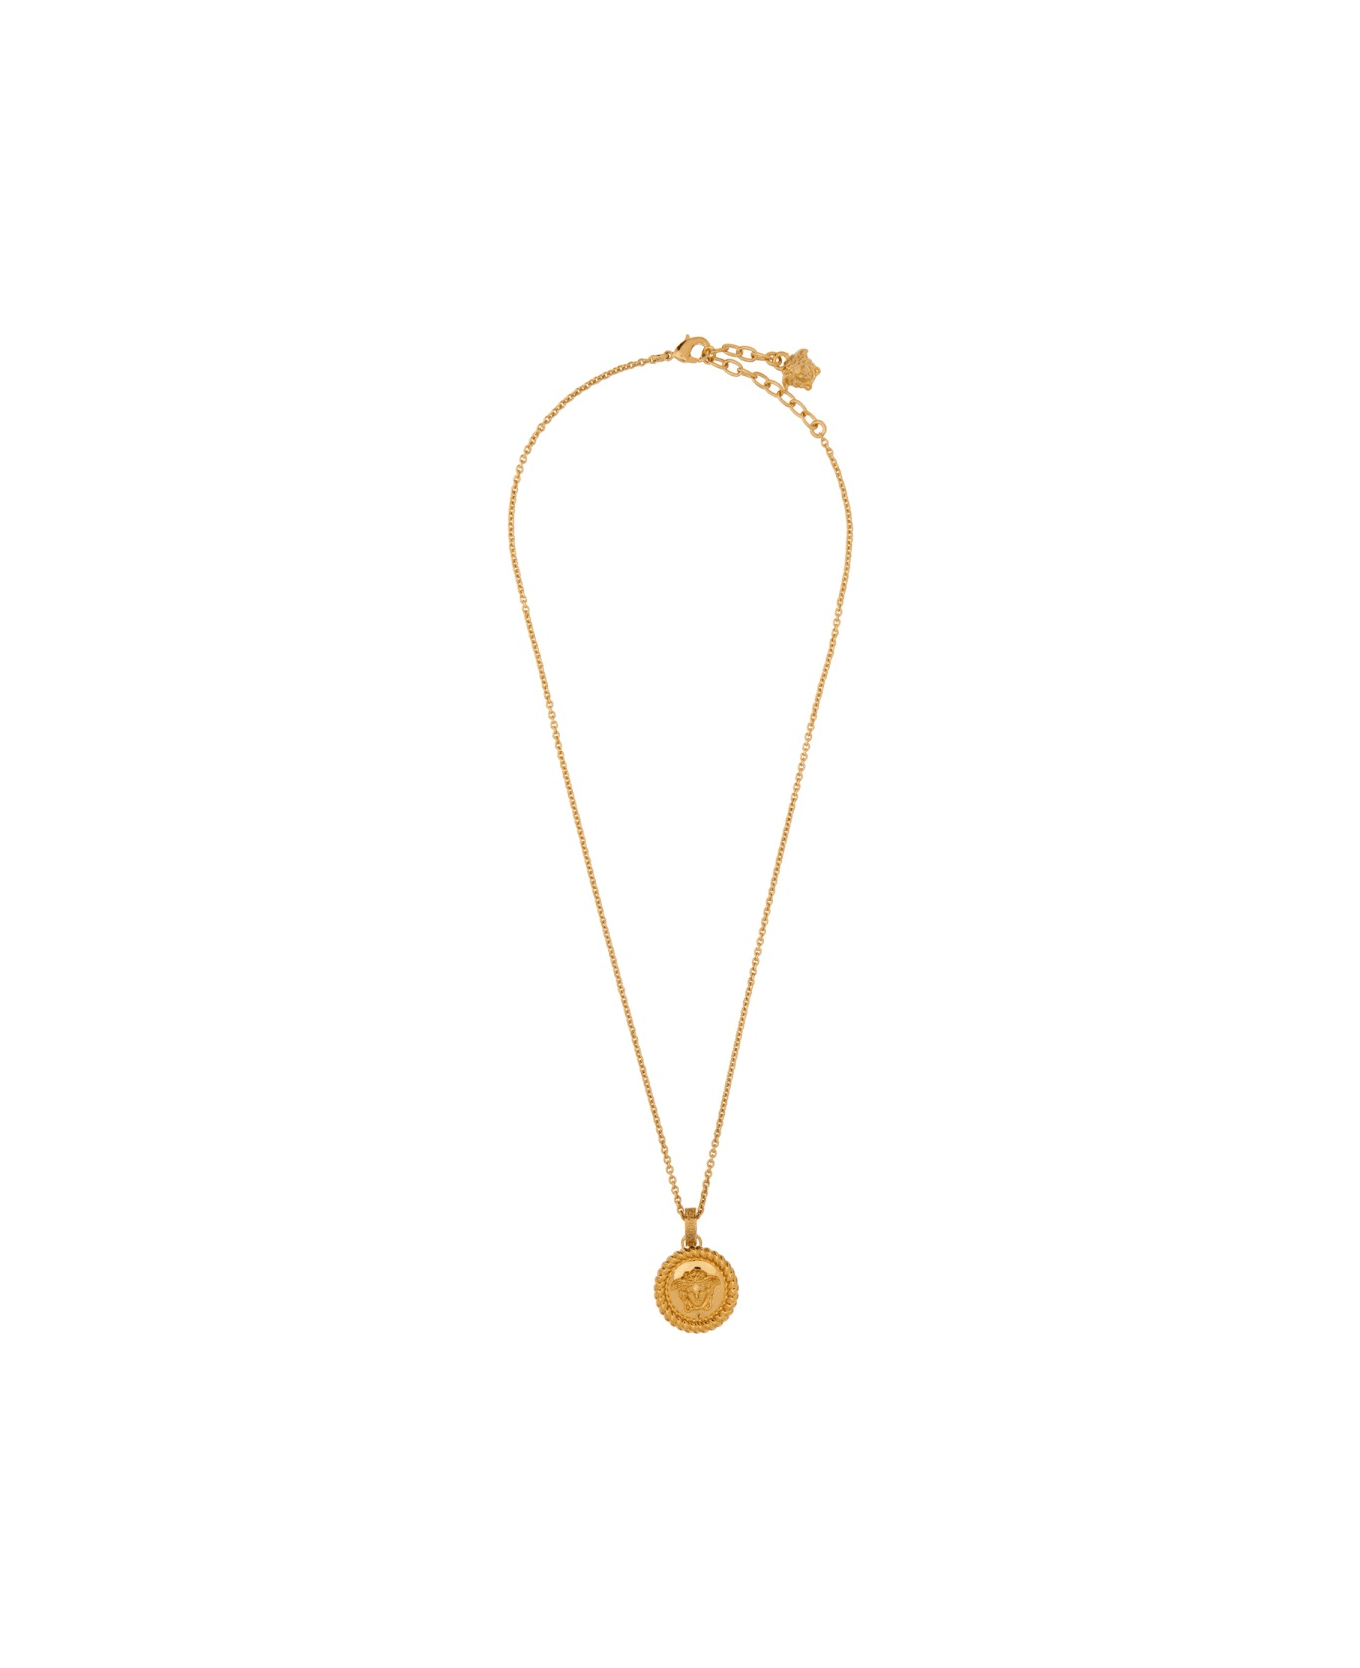 Versace 'jellyfish' Necklace - GOLD